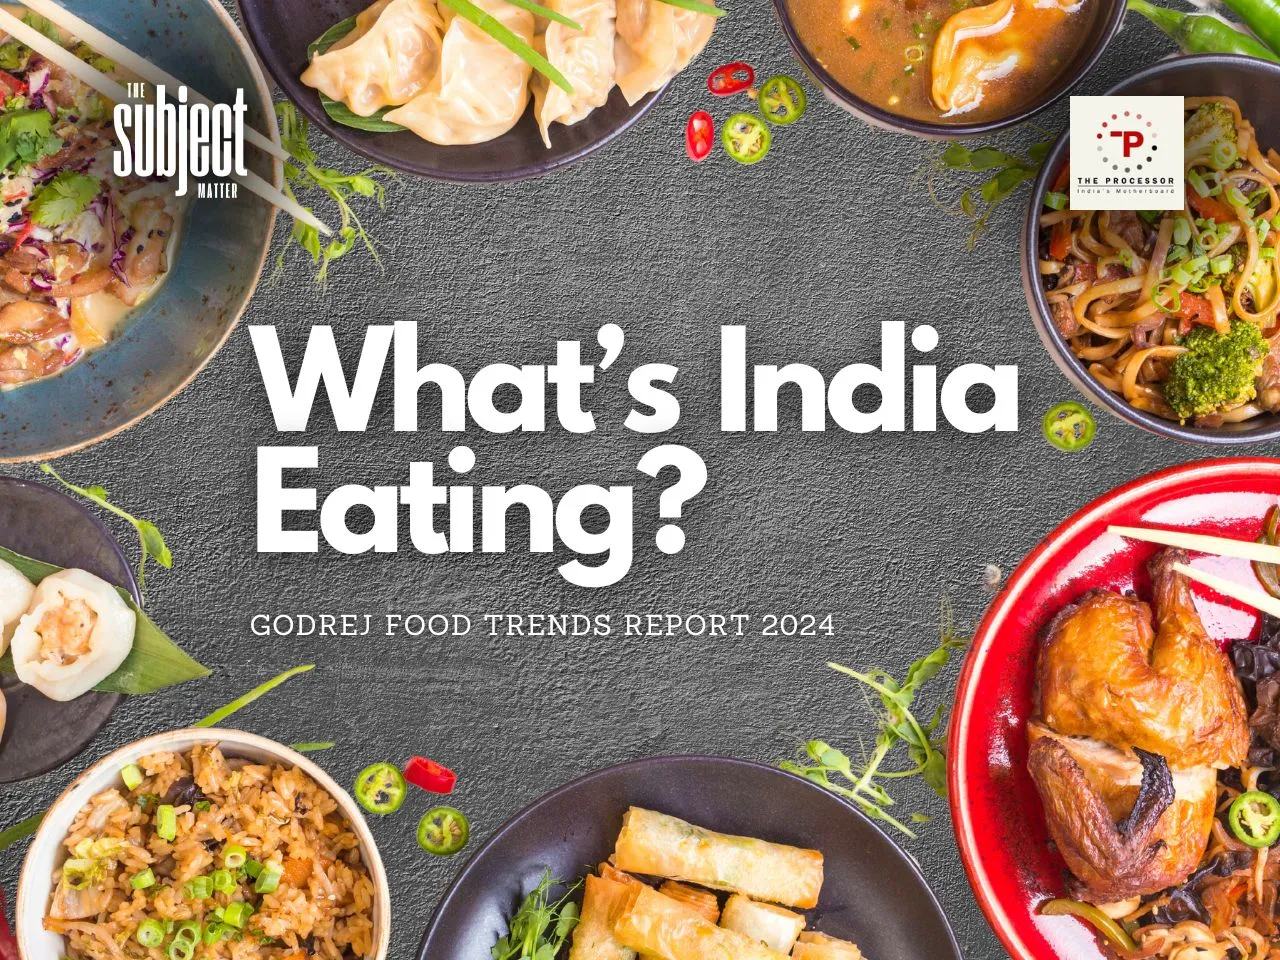 Is India's Culinary Revolution Gaining Momentum? Godrej Food Trends Report suggests so